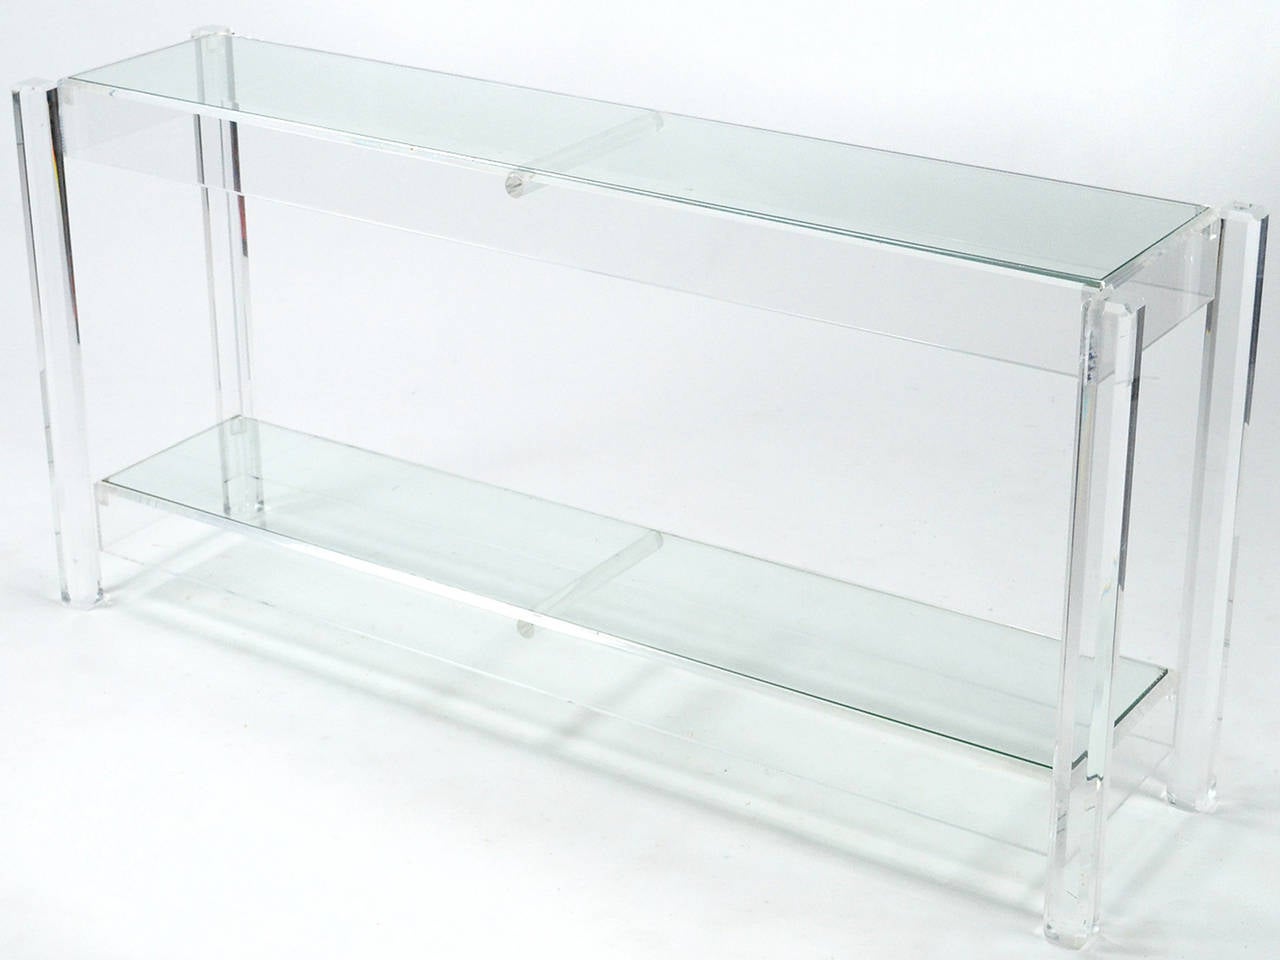 This two-tiered console or sofa table executed in Lucite with glass tops is handsome and understated. Beveled corners add depth to the faceted legs and skirts. Highly functional, the scale is perfect for an entryway or behind a sofa.